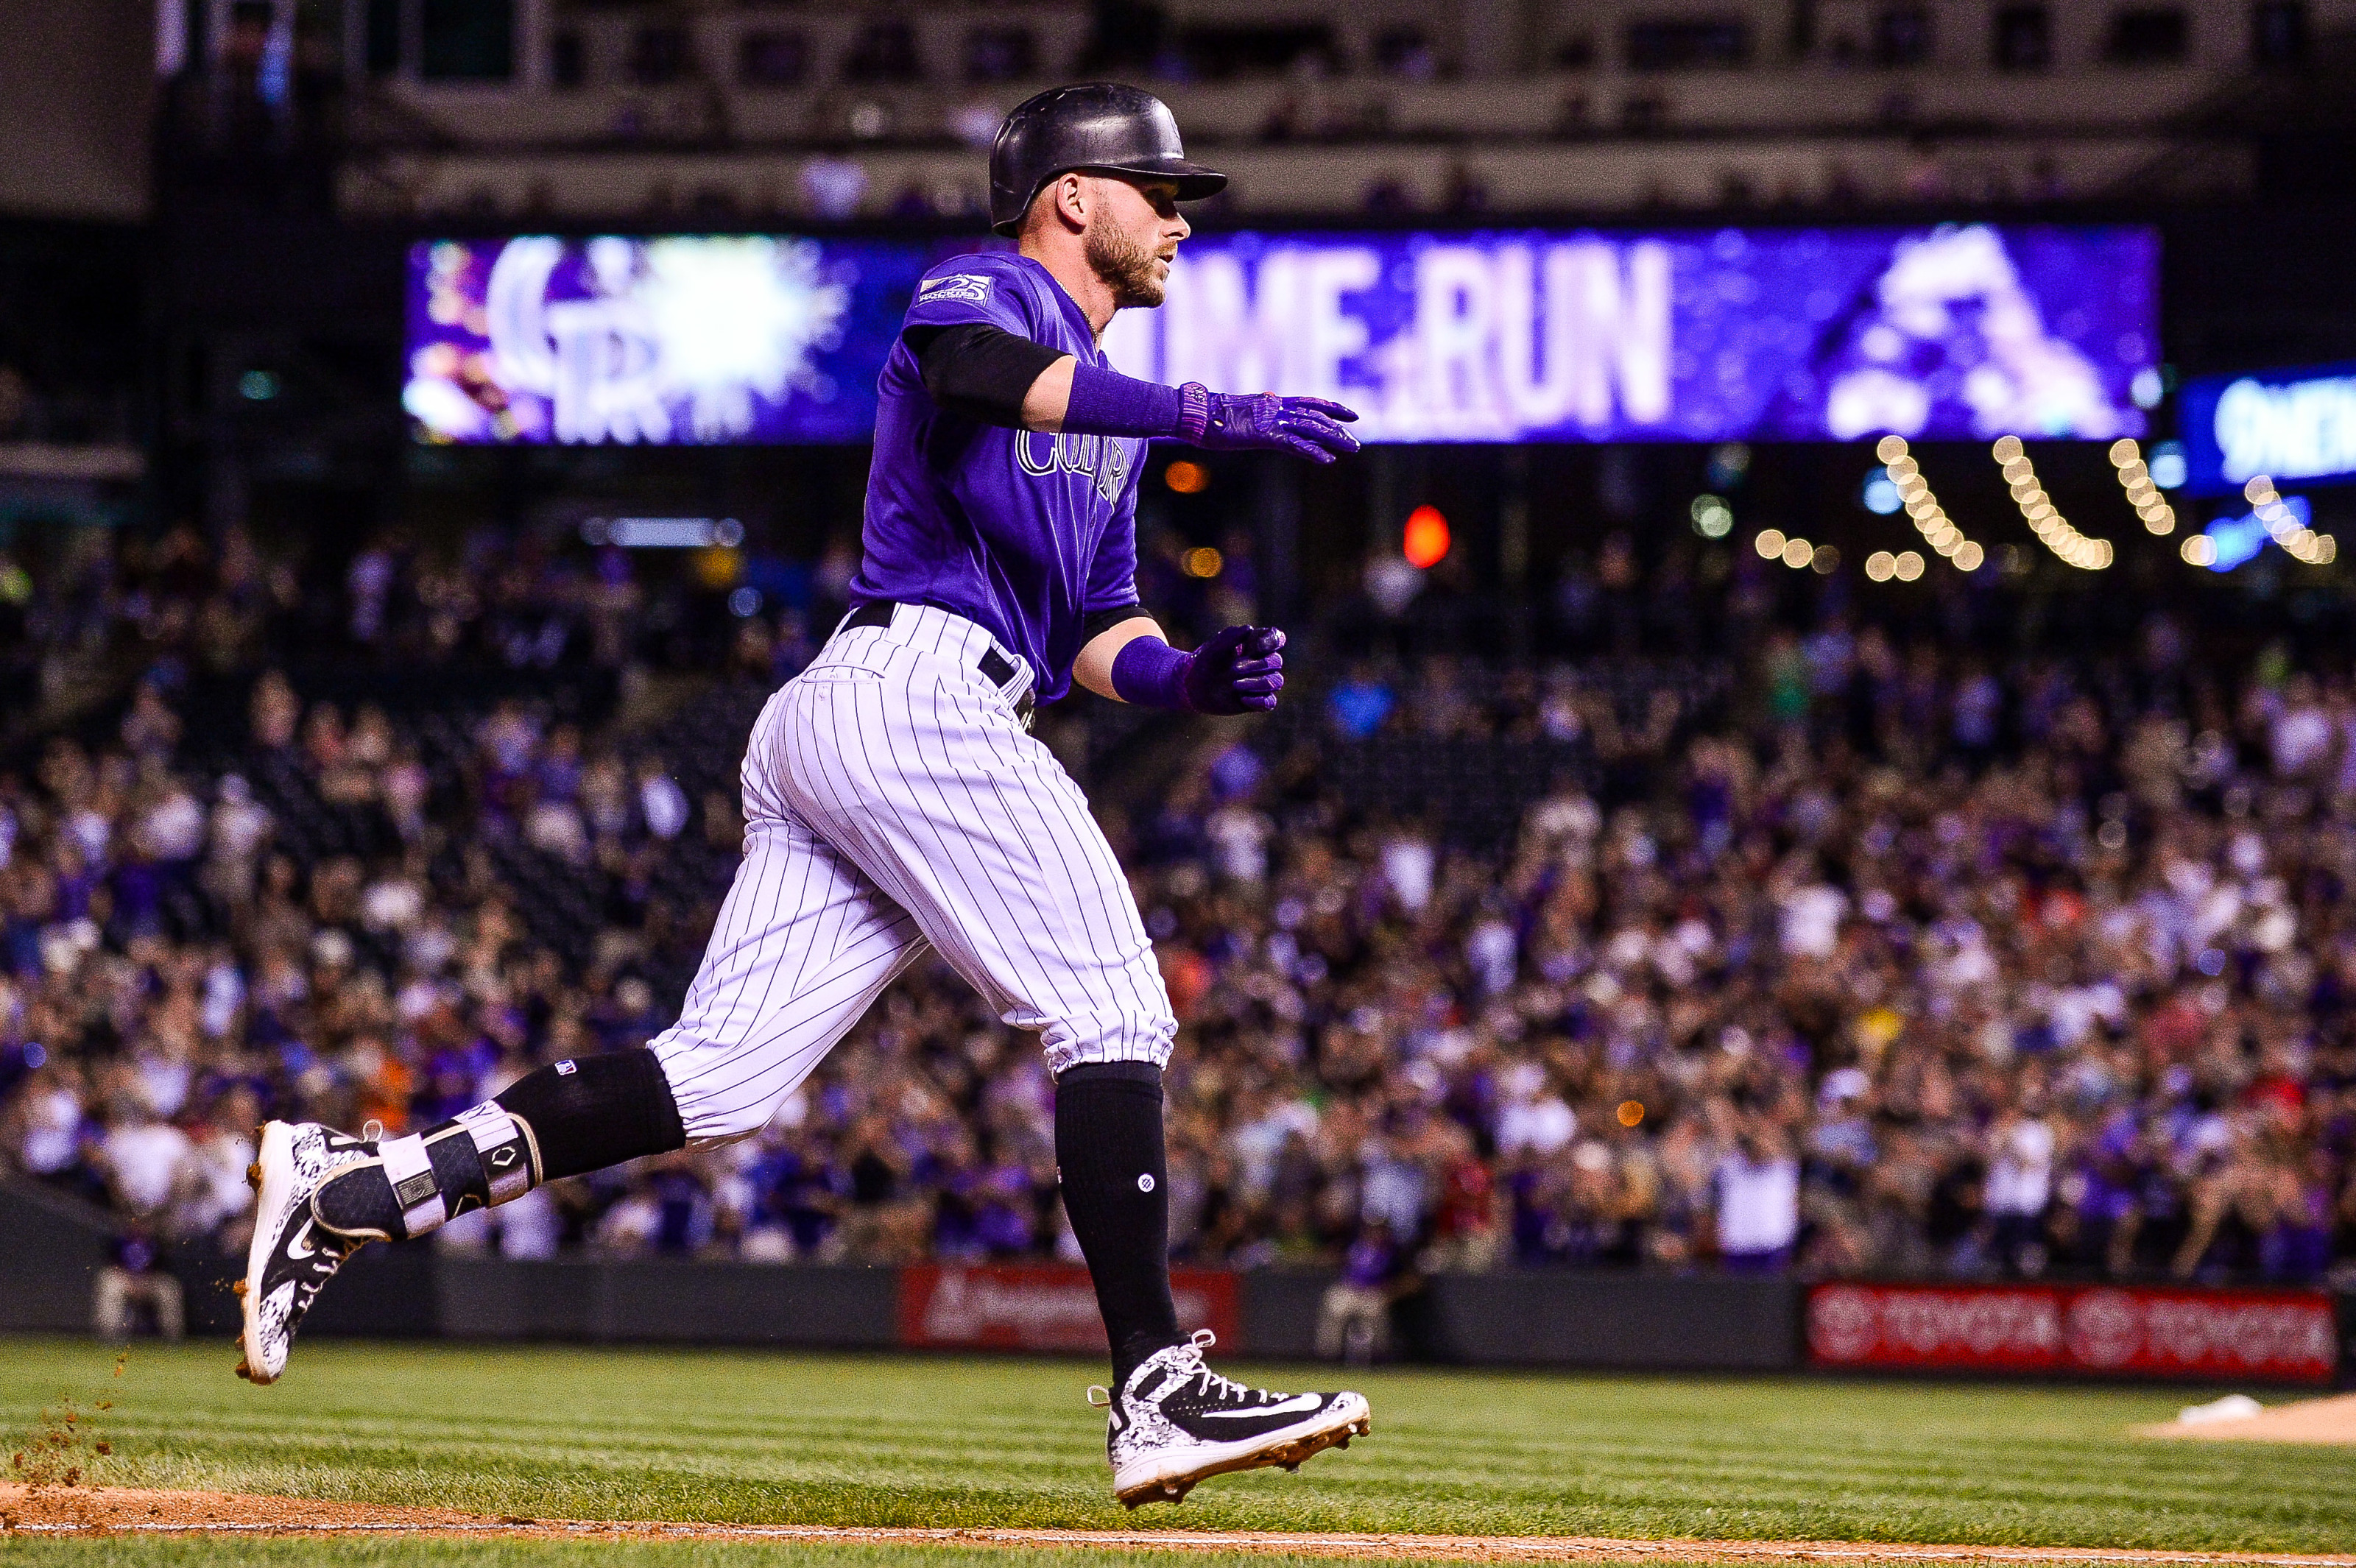 Trevor Story tied record for most rookie home runs in April; let's